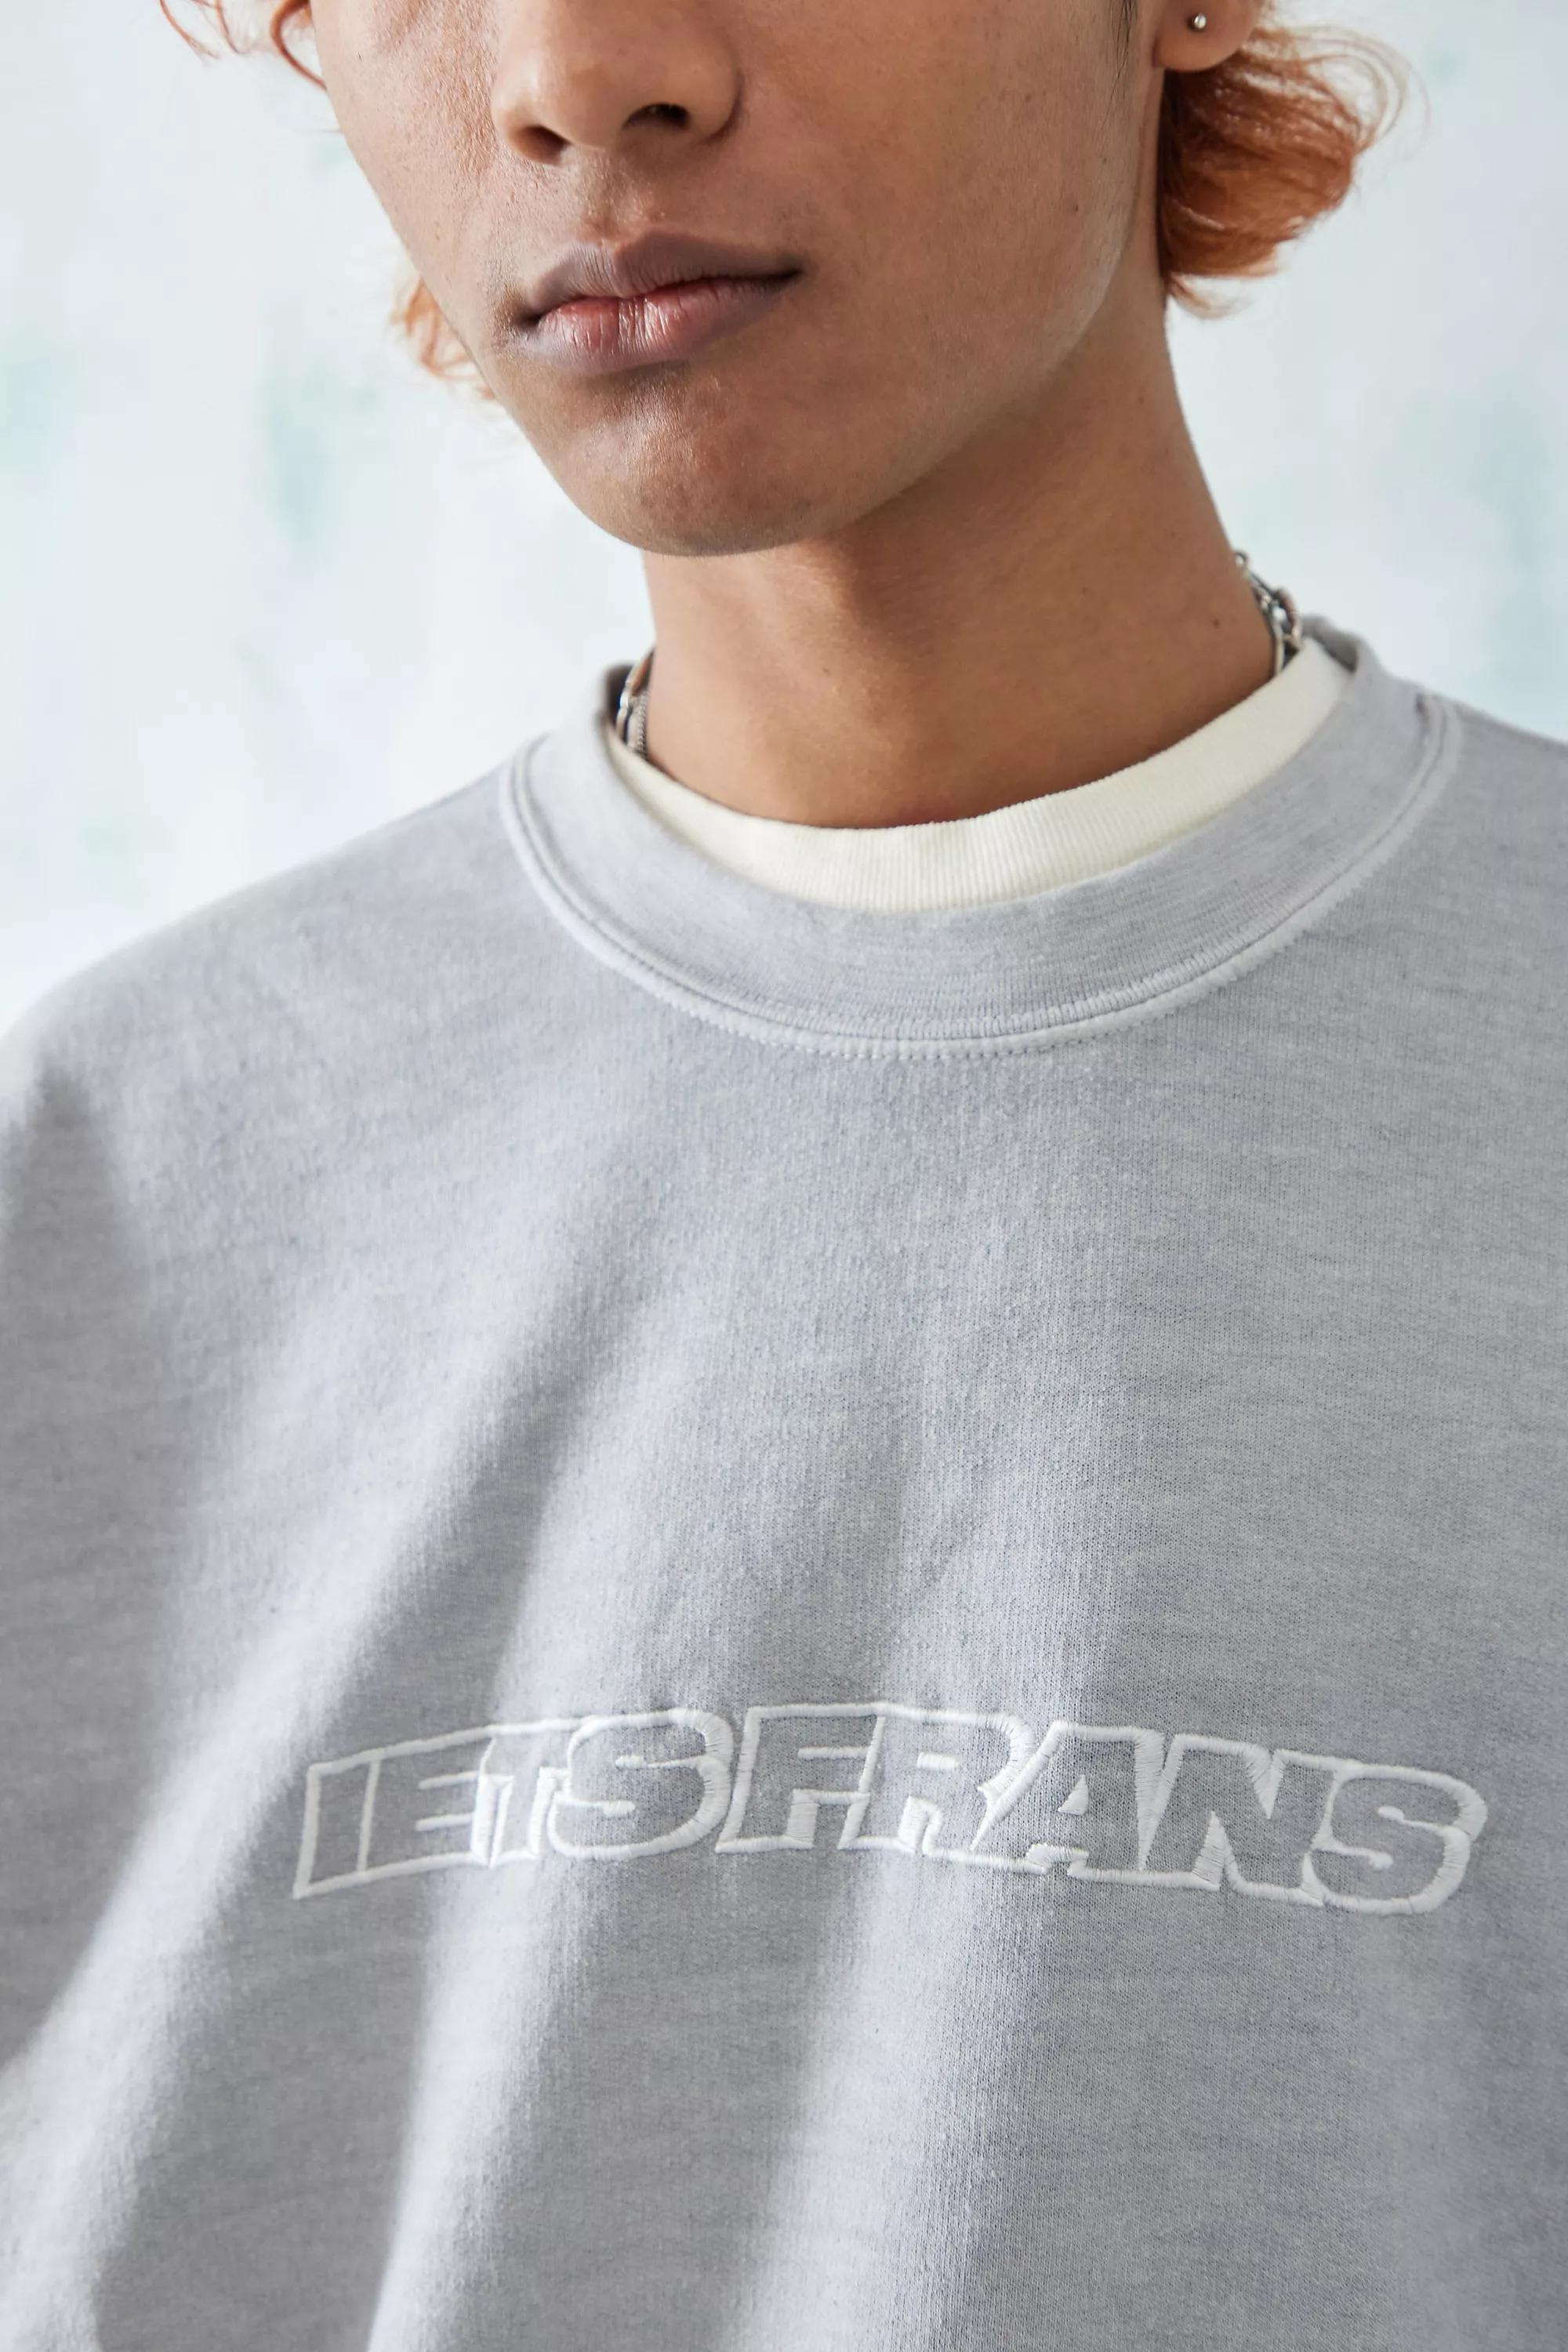 Urban Outfitters - Grey Big Embroidered Sweatshirt